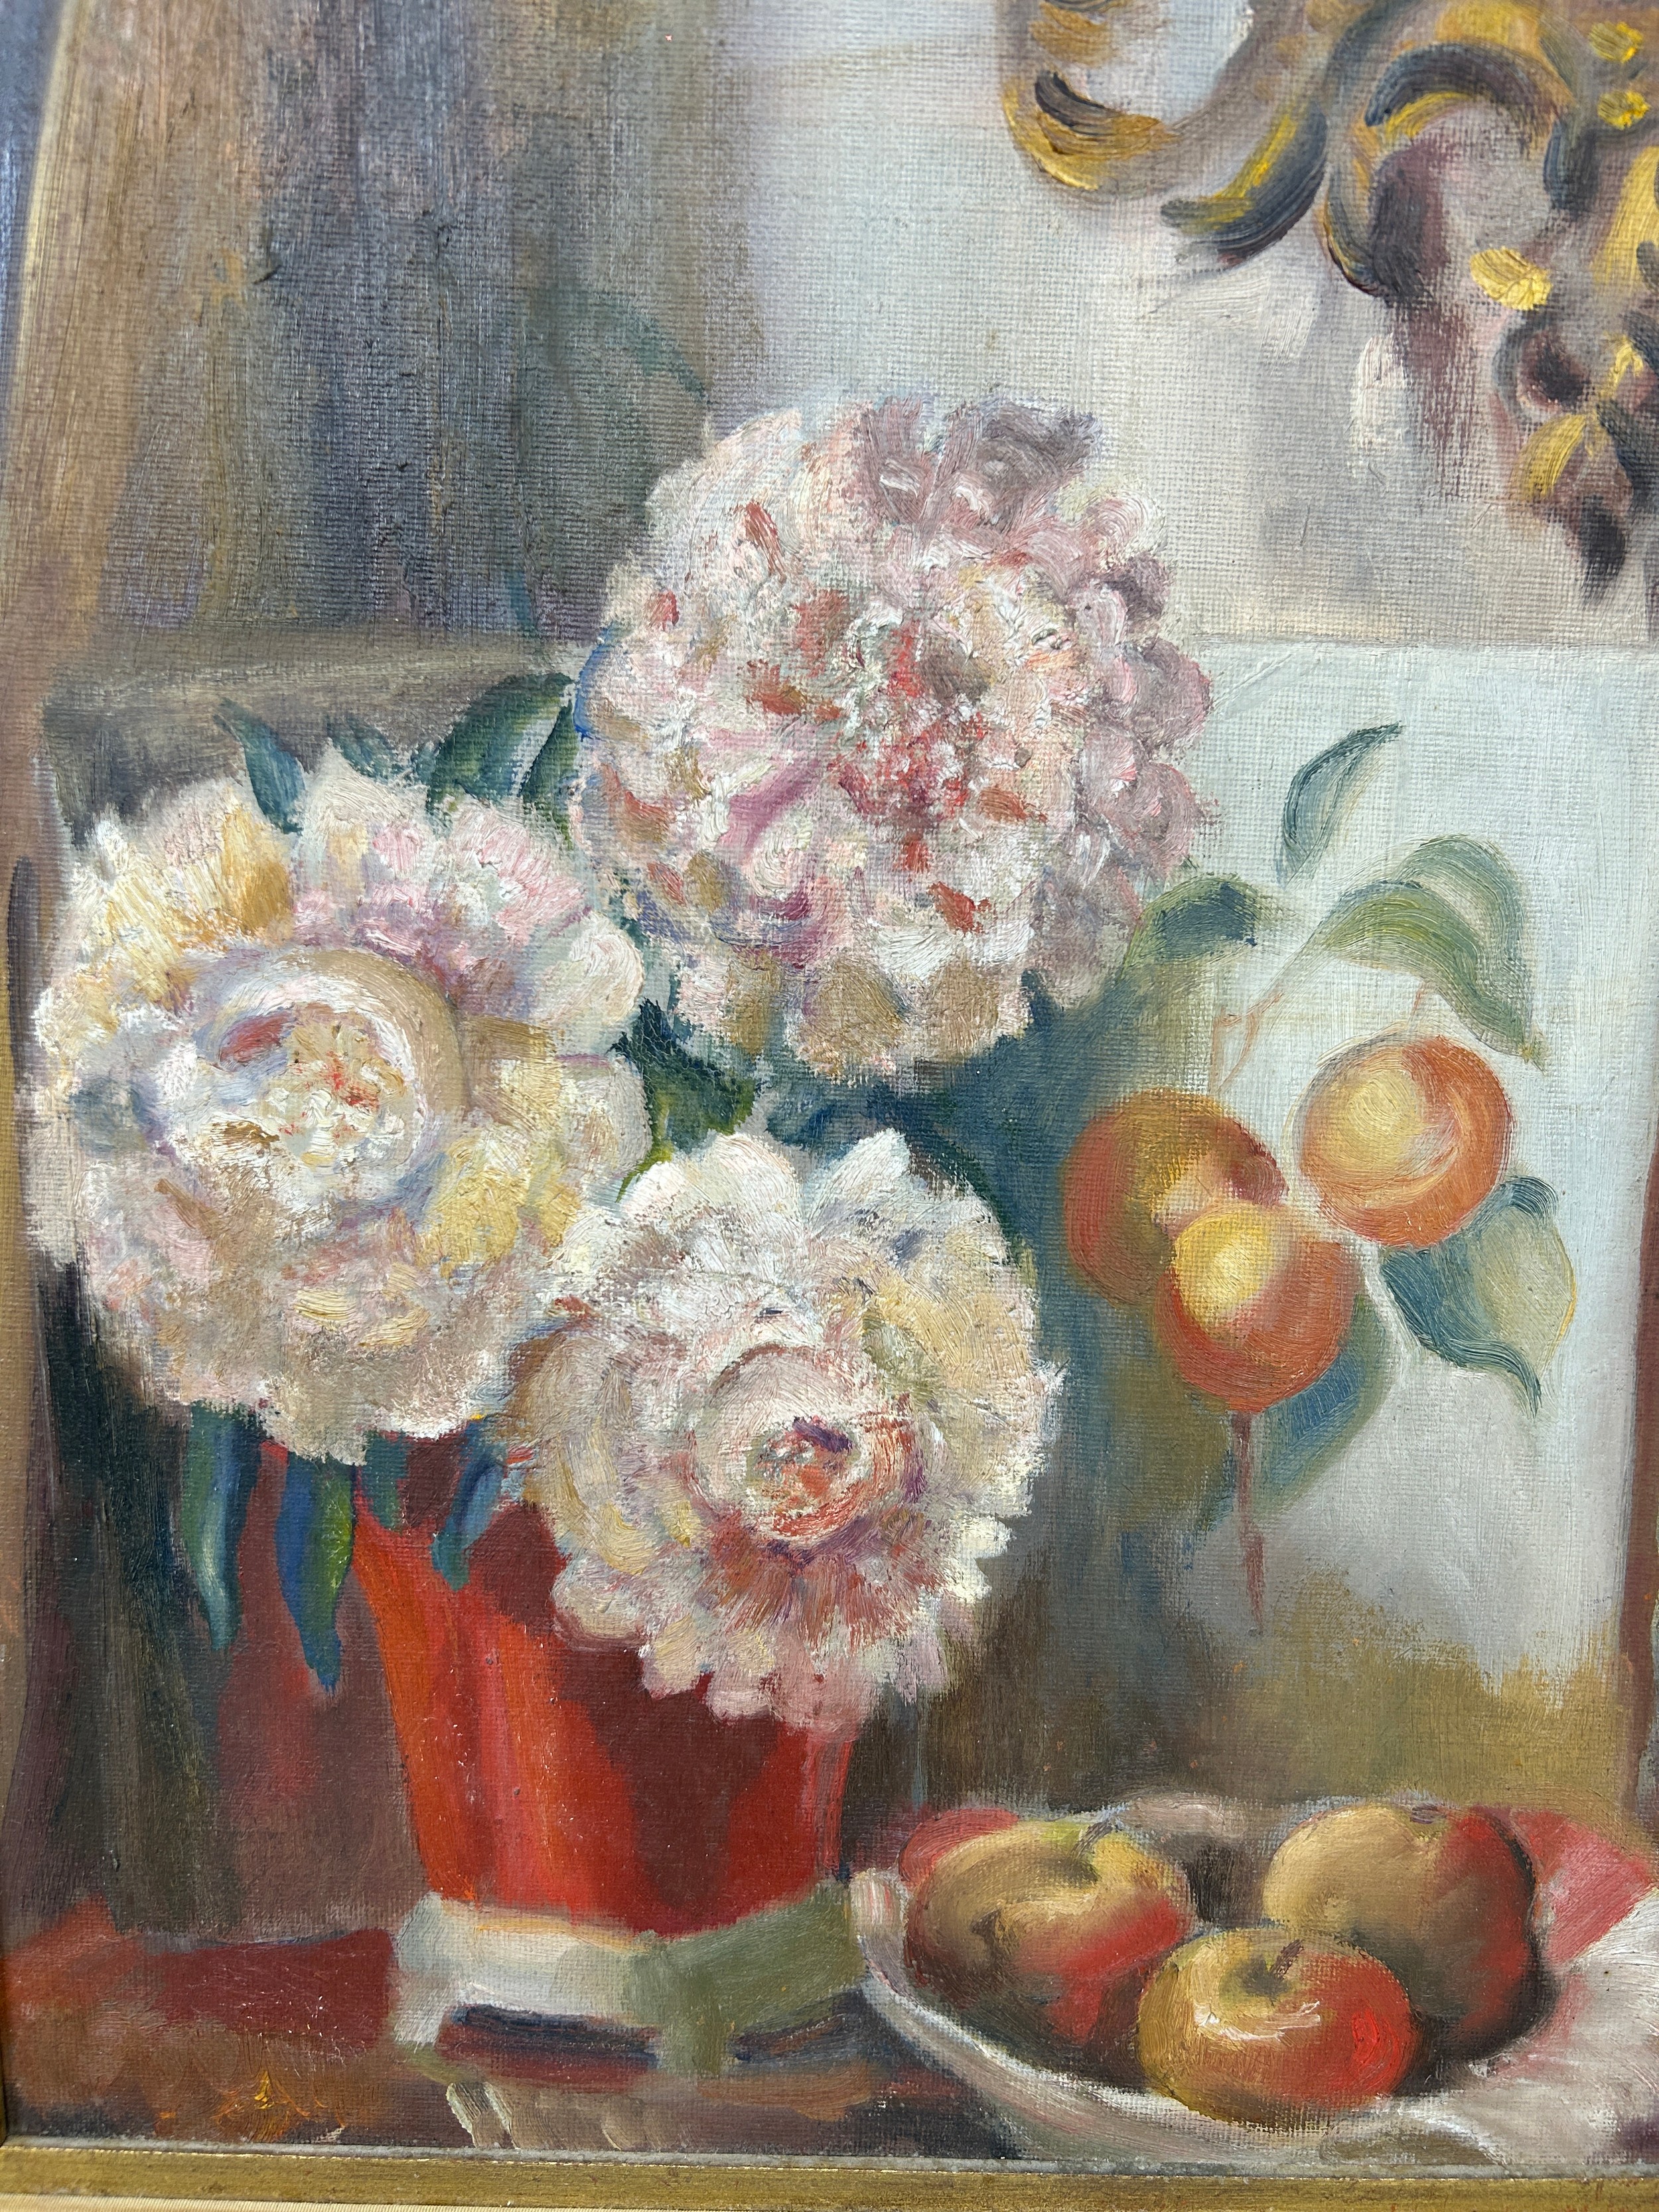 ATTRIBUTED TO TO WILL 'WILLIAM' ASHTON: AN OIL ON CANVAS PAINTING DEPICTING FLOWERS, 45cm x 37cm - Image 3 of 4